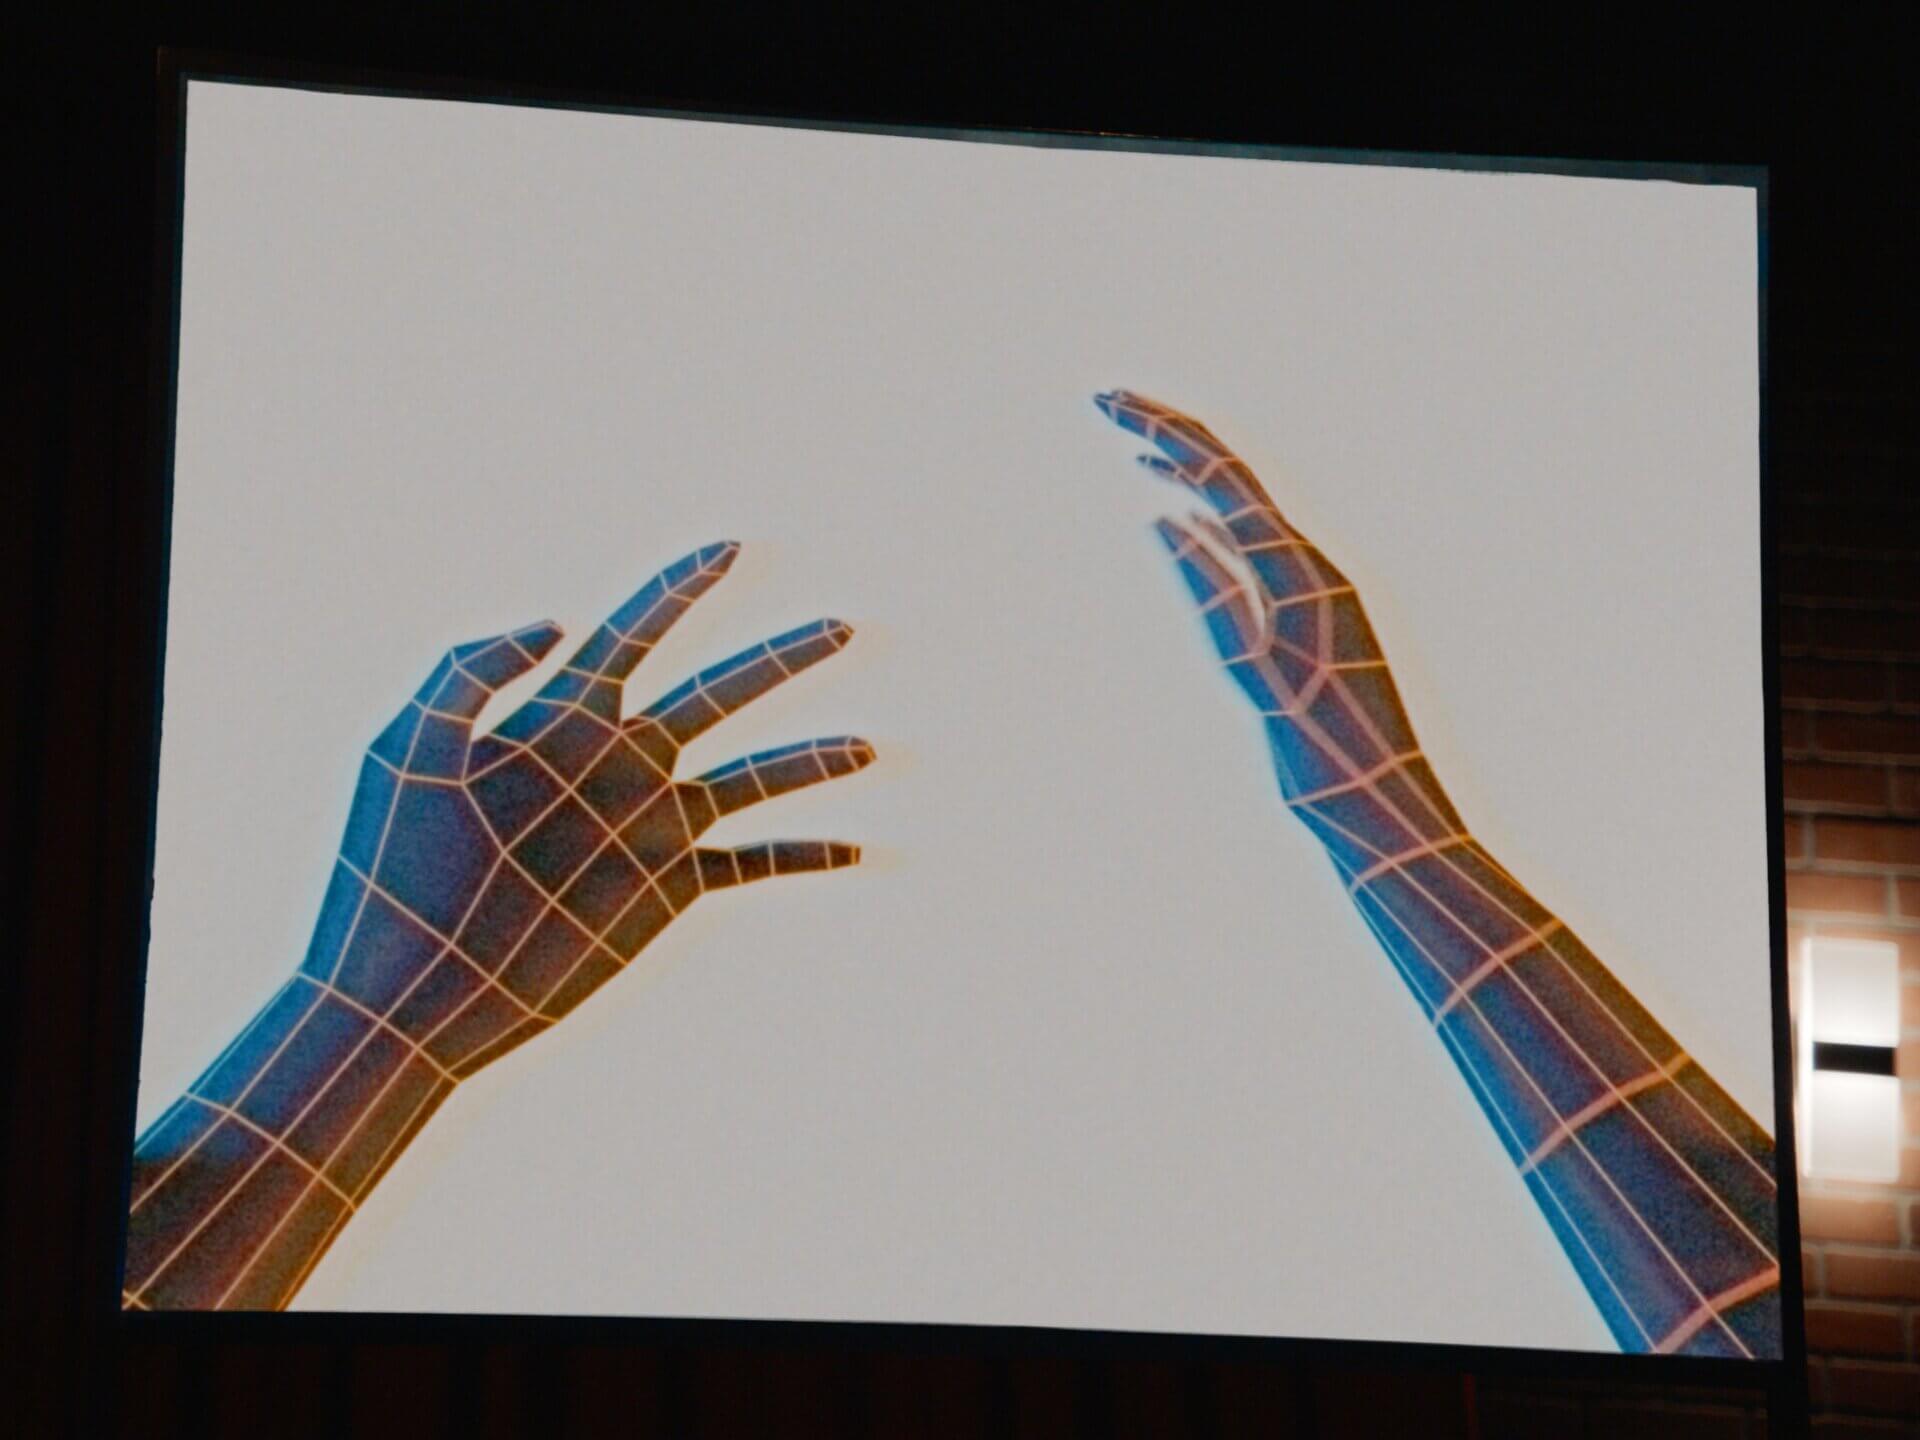 8-Bit virtual reality hands against a blank white backdrop.